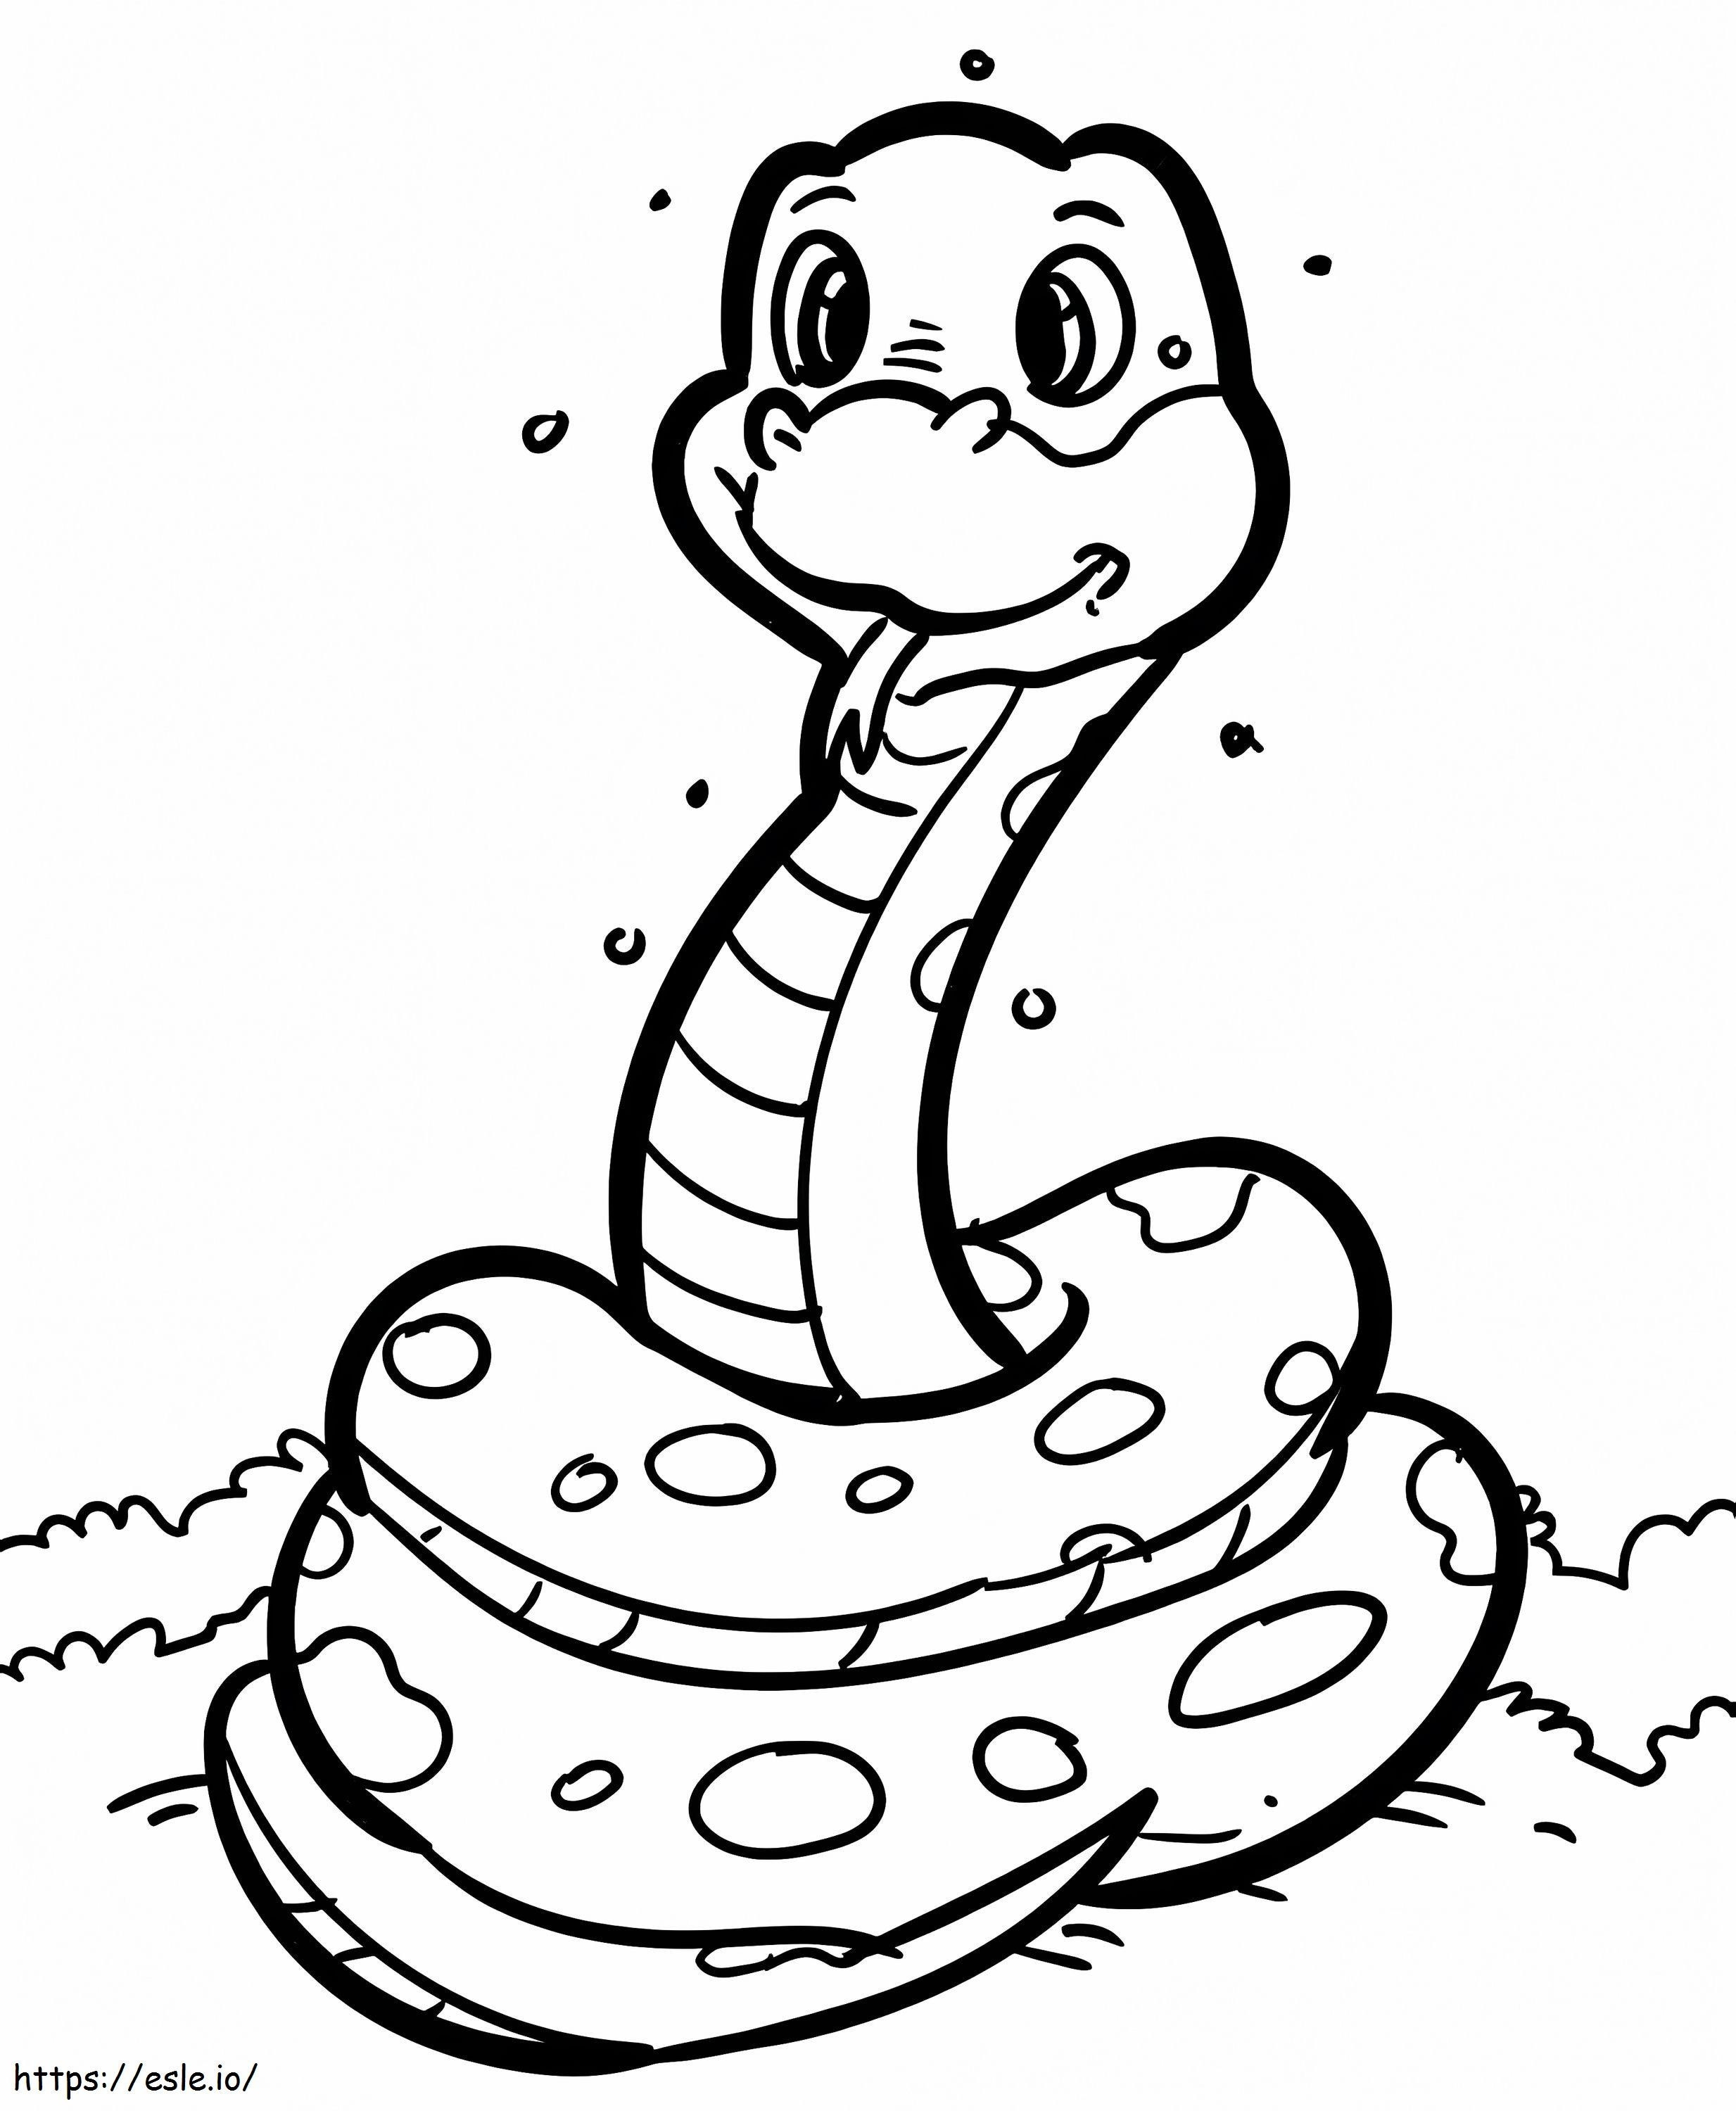 Little Snake coloring page